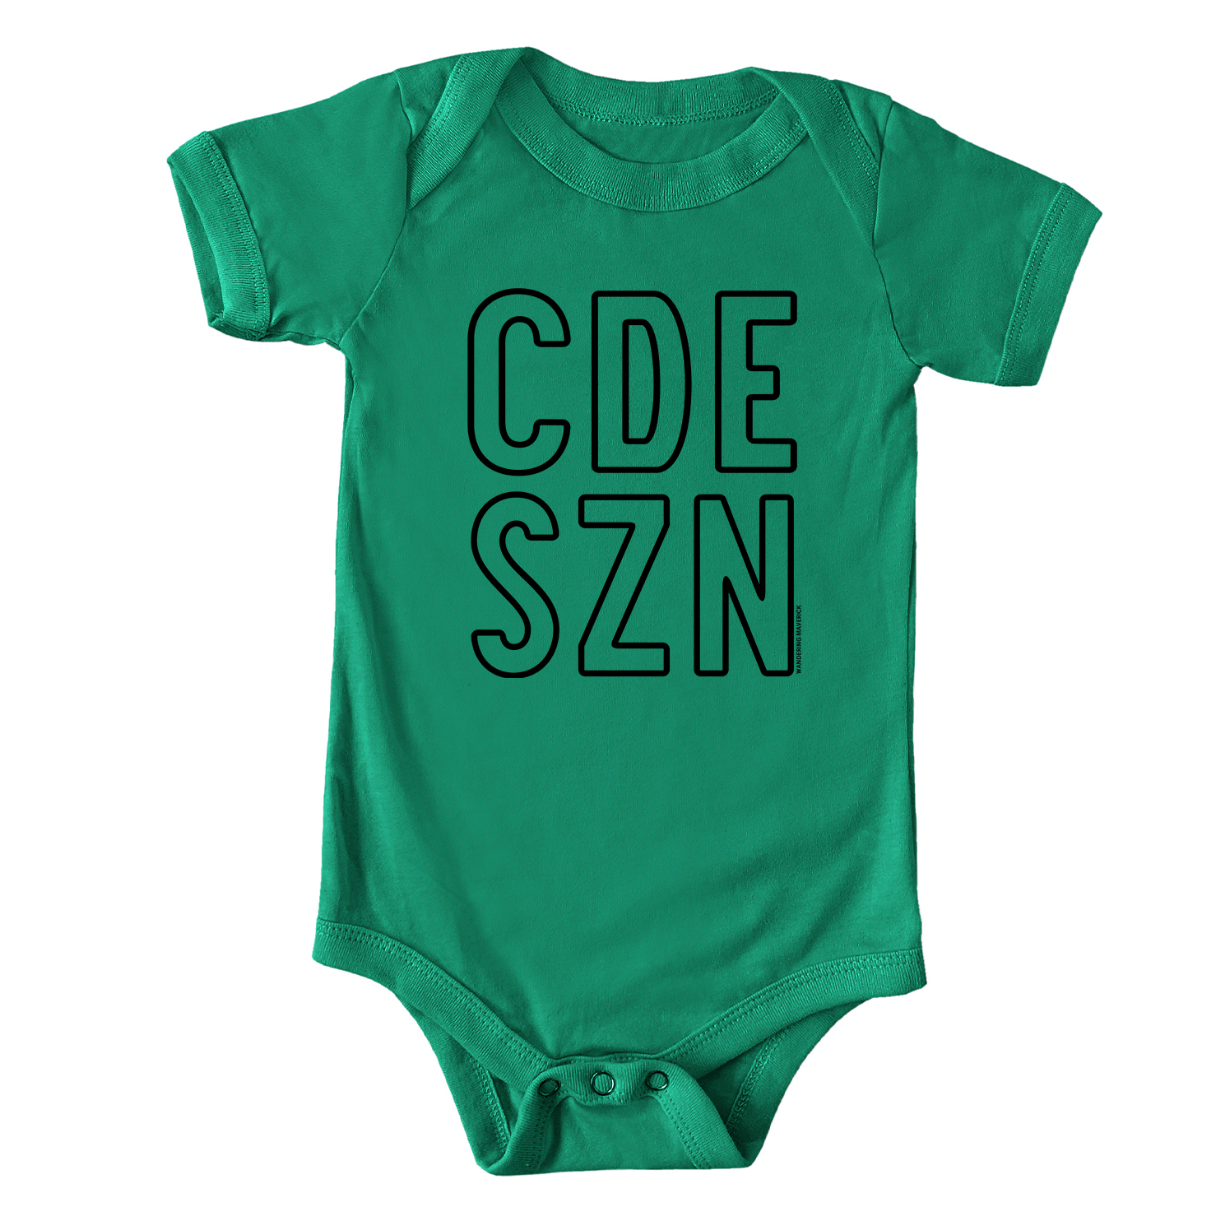 CDE SZN One Piece/T-Shirt (Newborn - Youth XL) - Multiple Colors!